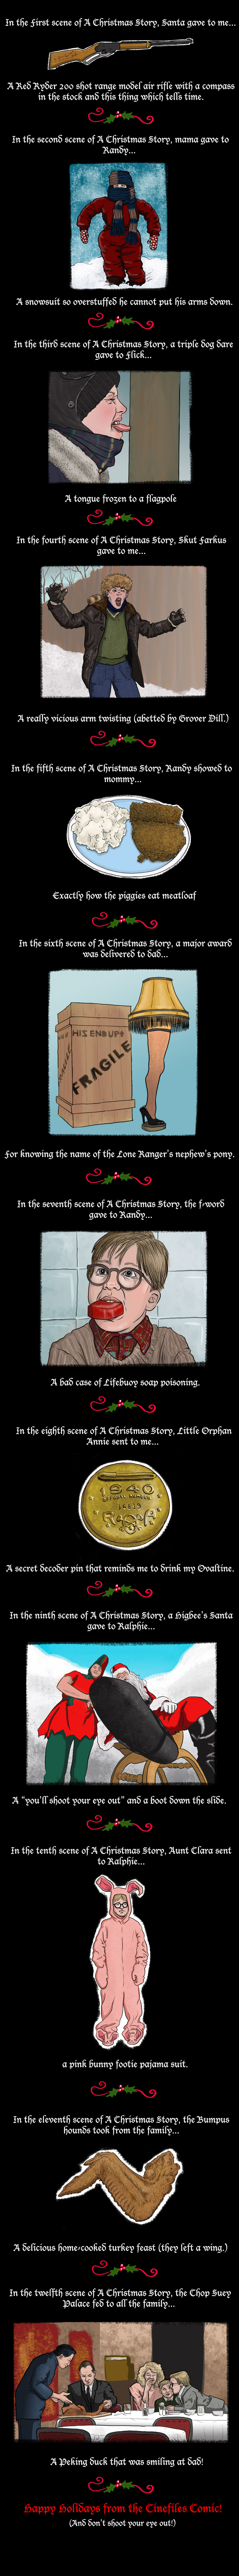 Day One: The Twelve Scenes of A Christmas Story